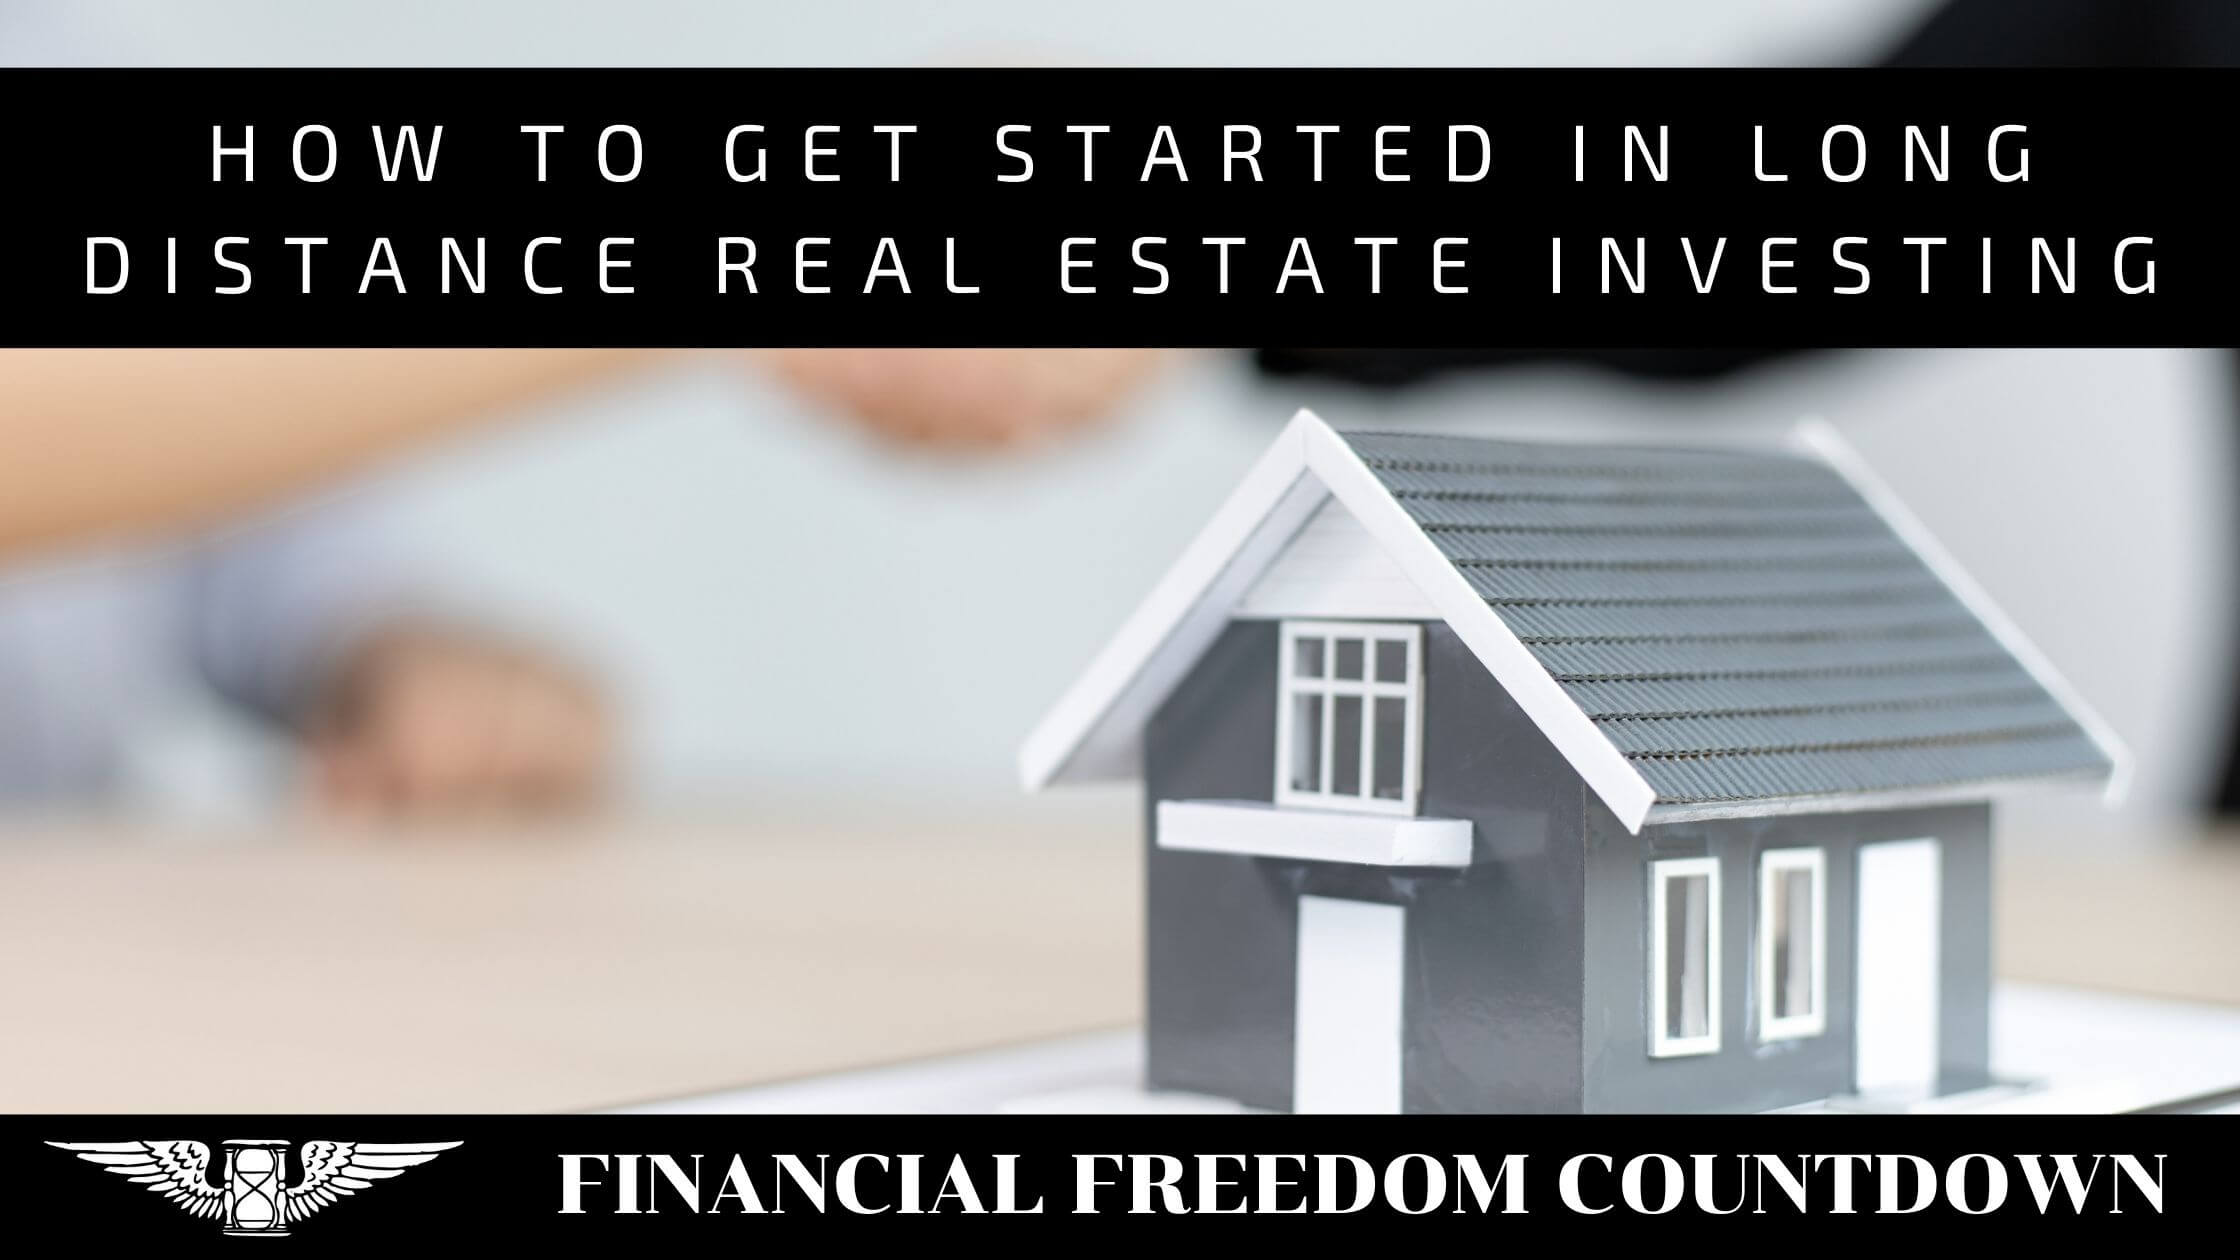 How To Get Started In Long Distance Real Estate Investing